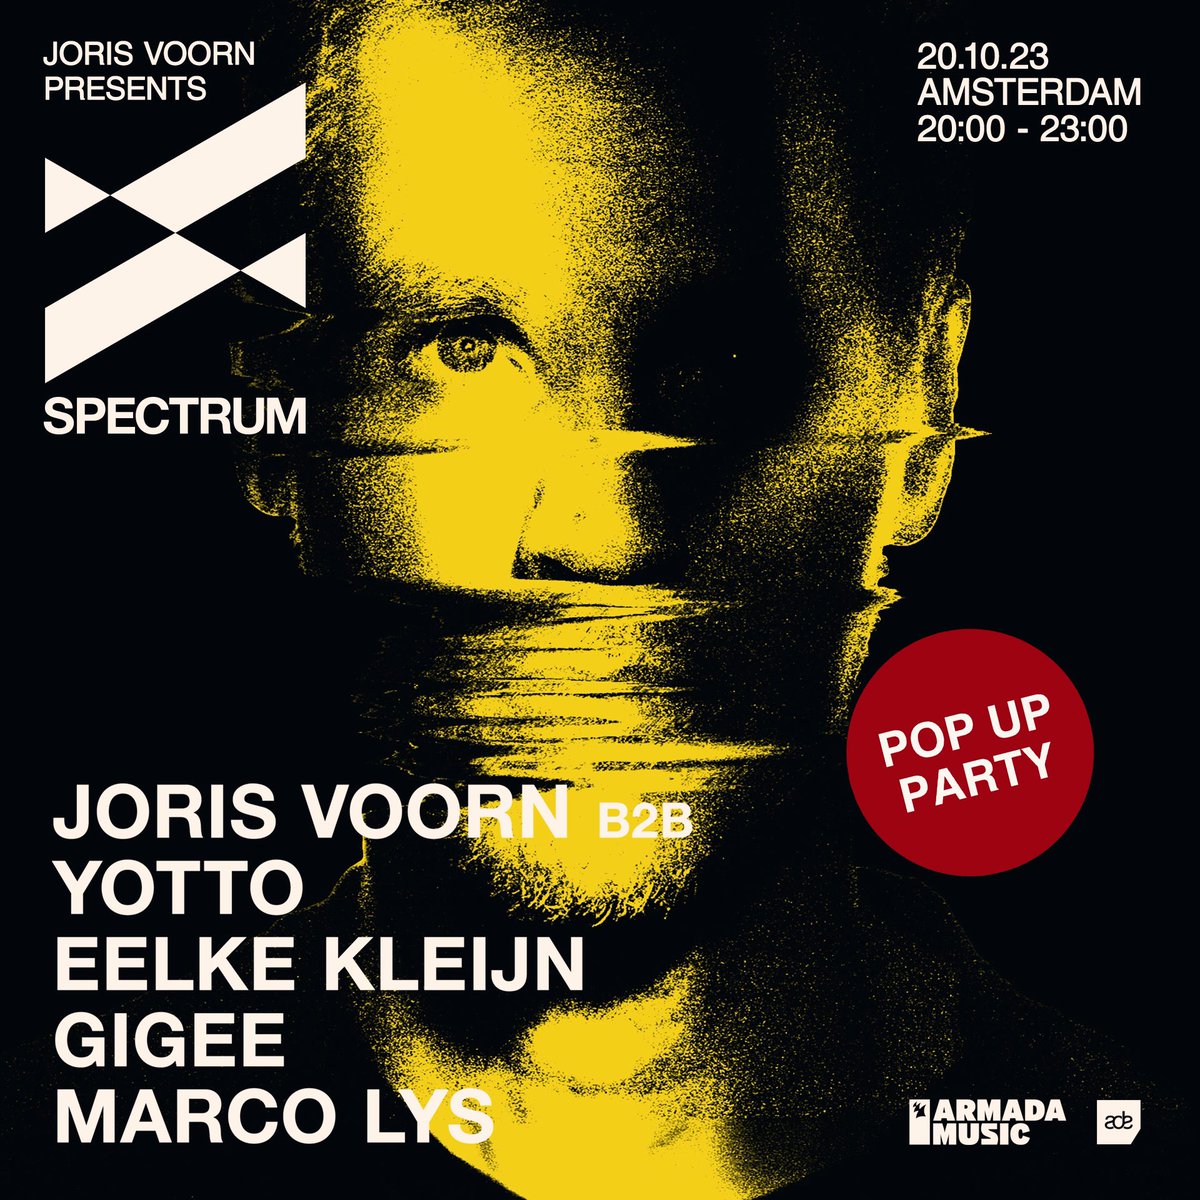 20/10 Spectrum ADE pop up party 👐. 125 people only. Winners will get notification by latest on October 16th. Sign up here: spectrummusic.nl #ADE @yottomusic @eelkekleijn @marco_lys @Armada @spectrummusicnl